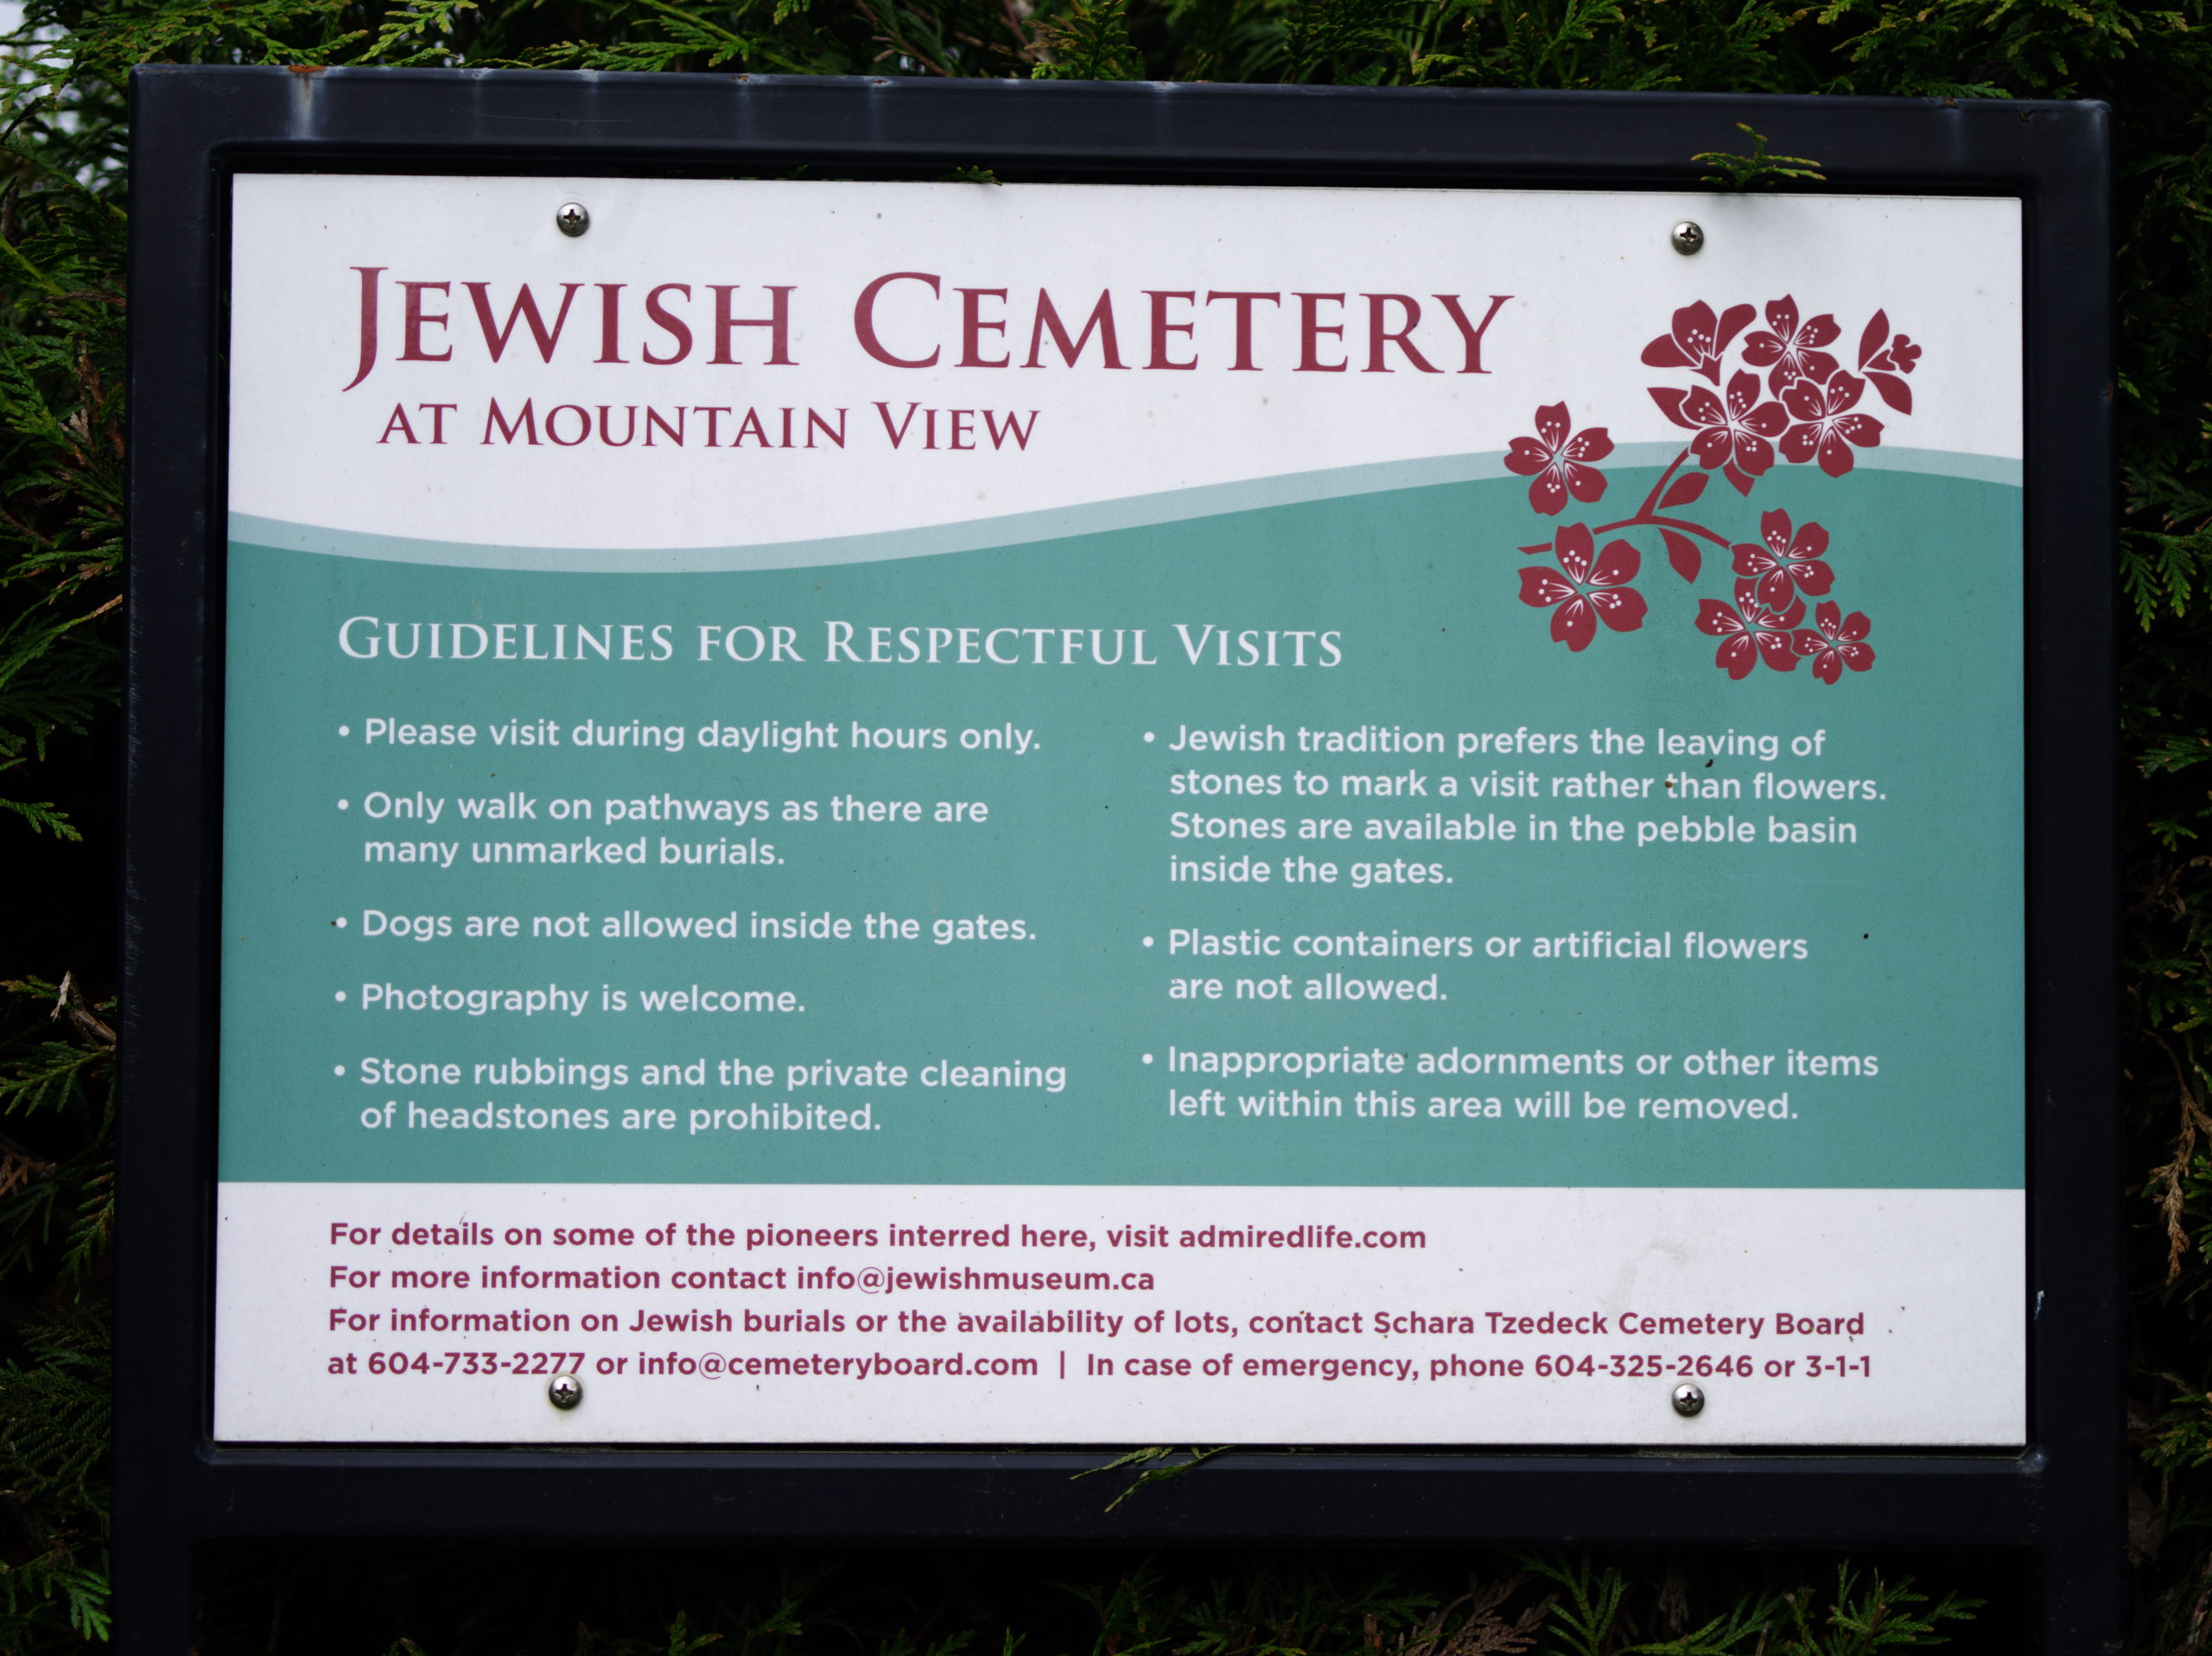 Image Description: Cedar hedge branches surround a close up of an information plaque at Mountain View Cemetery about the Jewish Cemetery. The information plaque is surrounded by a dark metal frame. There is a drawing of a flowering tree branch in the top right corner of the plaque. There is a ribbon of colour behind the guideline section of the plaque.The written english text reads: JEWISH CEMETERY AT MOUNTAIN VIEW GUIDELINES FOR RESPECTFUL VISITS Please visit during daylight hours only. Only walk on pathways as there are many unmarked burials. Dogs are not allowed inside the gates. Photography is welcome. Stone rubbings and private cleaning of headstones are prohibited. Jewish tradition prefers the leaving of stones to mark a visit rather than flowers. Stones are available in the pebble basin inside the gates. Plastic containers or artificial flowers are not allowed. Inappropriate adornments or other items left within this area will be removed. For details on some of the pioneers interred here, visit admiredlife.com For more information contact info@jewishmuseum.ca For information on Jewish burials or the availability of lots, contact Schara Tzedeck Cemetery Board at 604-733-2277 or info@cemeteryboard.com I In case of emergency, phone 604-325-2646 or 3-1-1